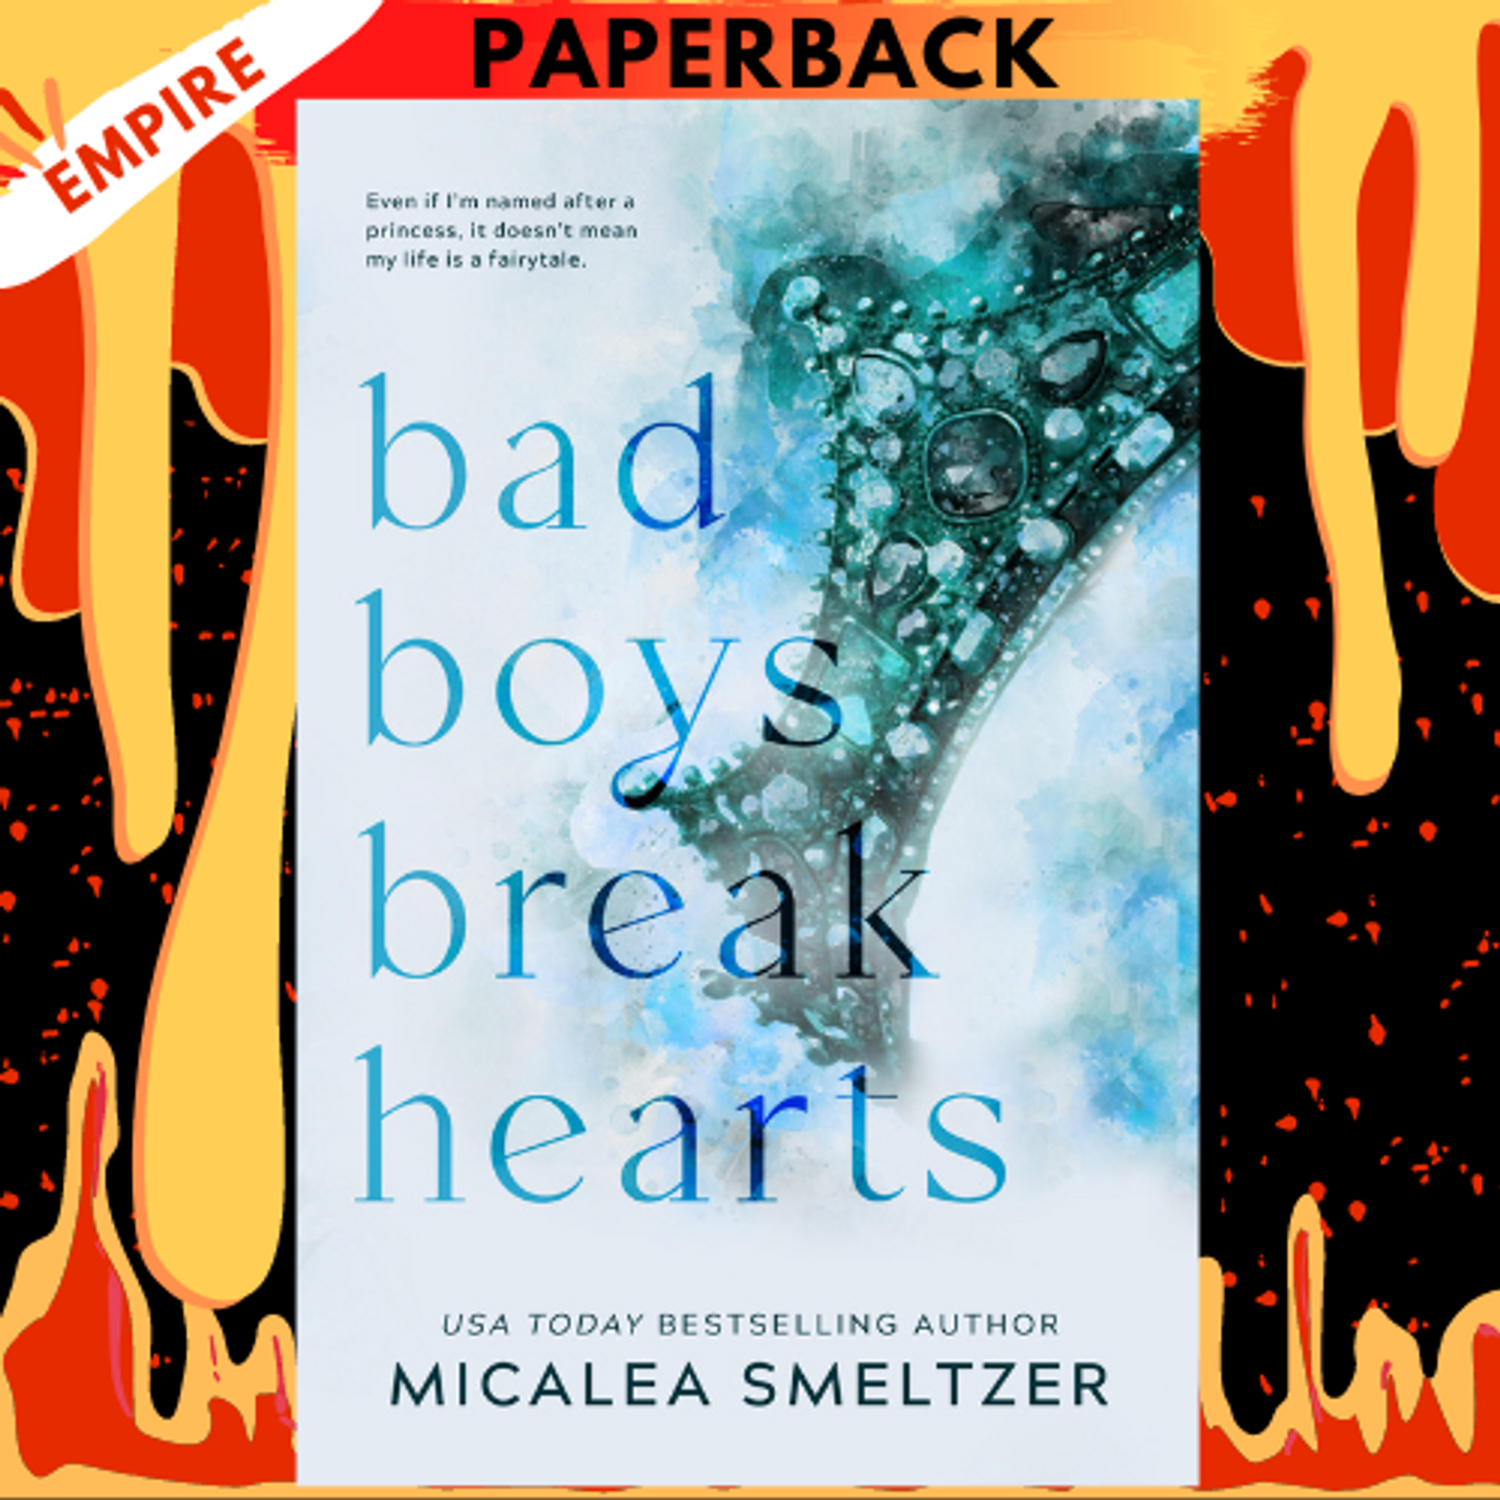 Real Players Never Lose (The Boys, #3) by Micalea Smeltzer [Books Been]